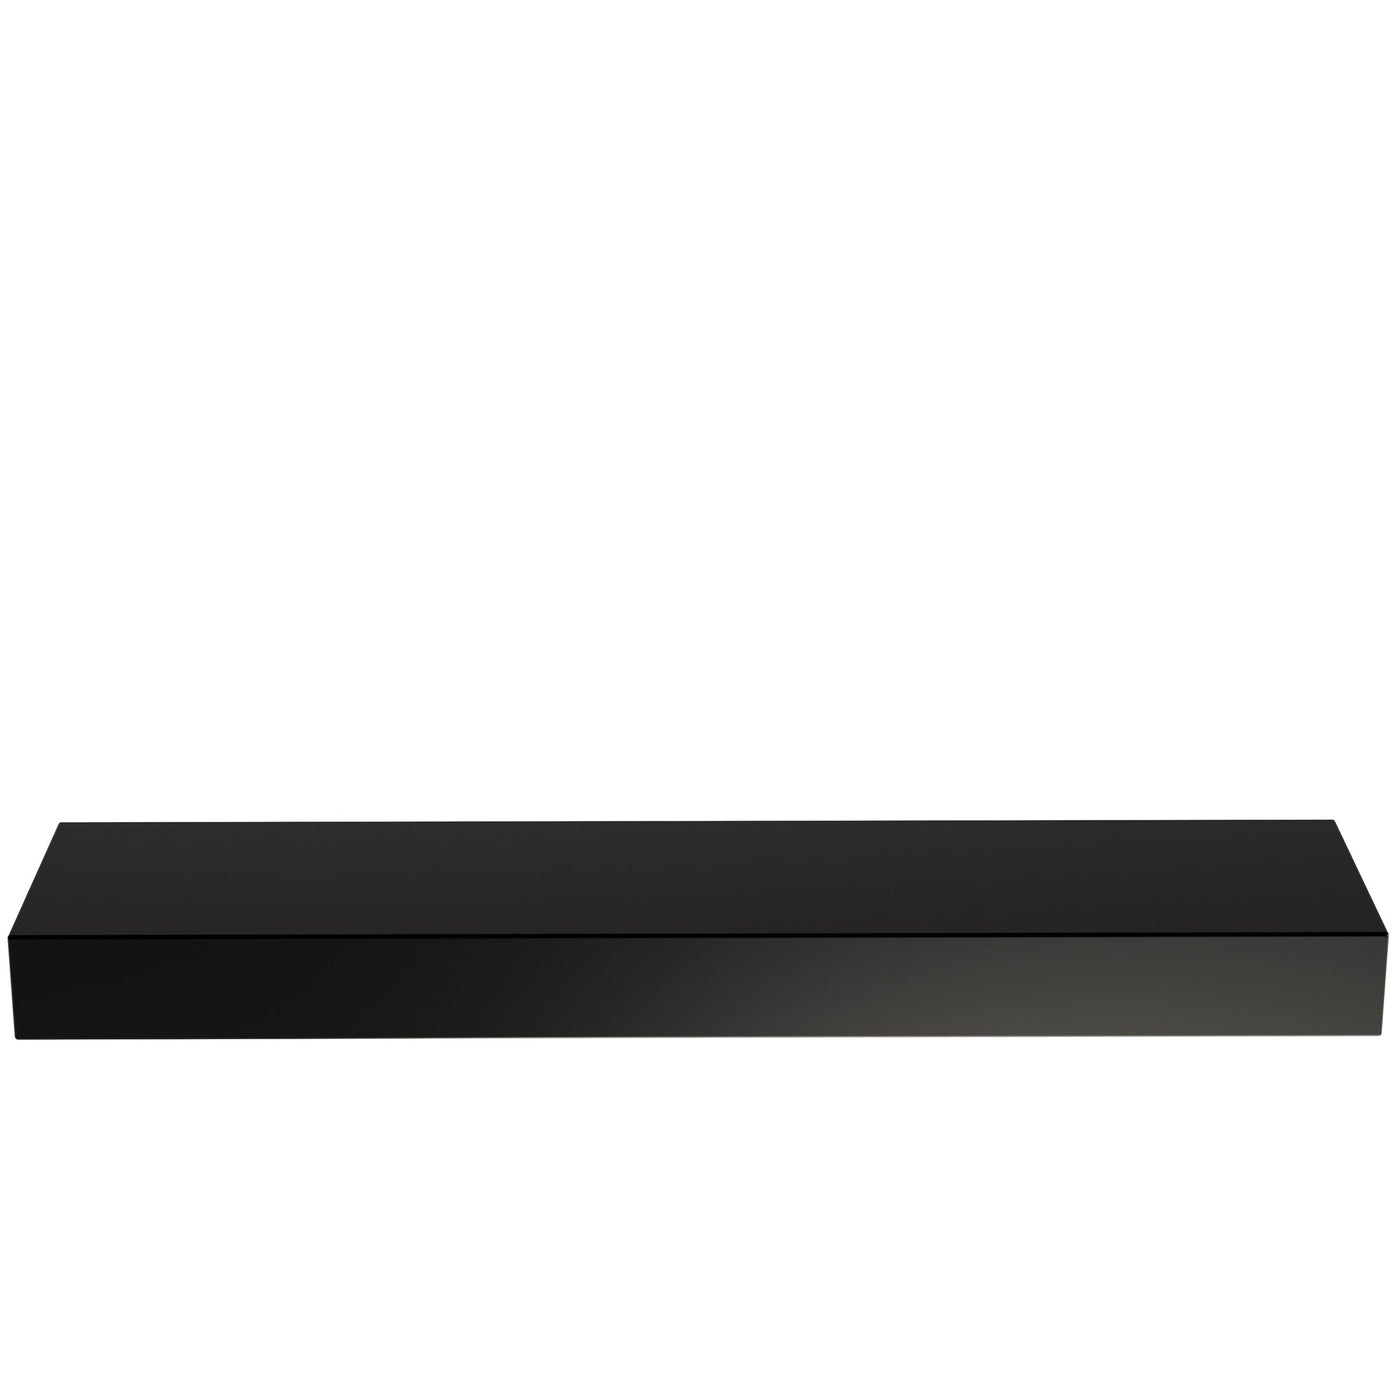 Floating Shelf- Black Conversion Varnish Paint - 4 Inches Thick